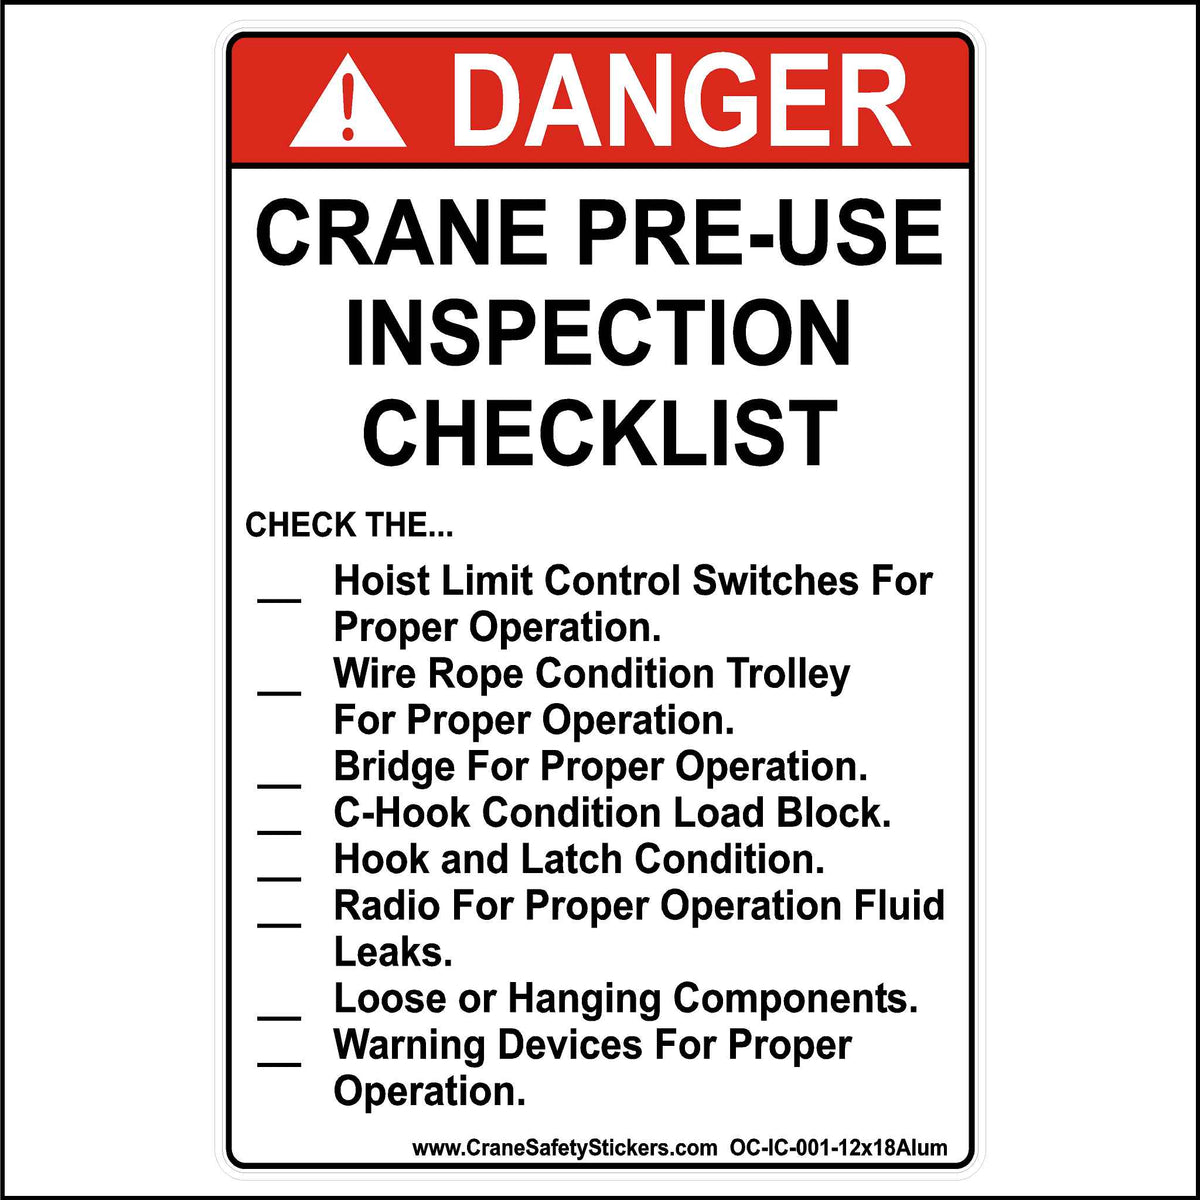 This 12 inch by 18 inch Aluminum crane pre-use inspection checklist sign is printed in white and red with black lettering reading, CRANE PRE-USE INSPECTION CHECKLIST CHECK THE... Hoist Limit Control Switches For Proper Operation. Wire Rope Condition Trolley For Proper Operation. Bridge For Proper Operation. C-Hook Condition Load Block. Hook and Latch Condition. Radio For Proper Operation Fluid Leaks. Loose or Hanging Components. Warning Devices For Proper Operation.